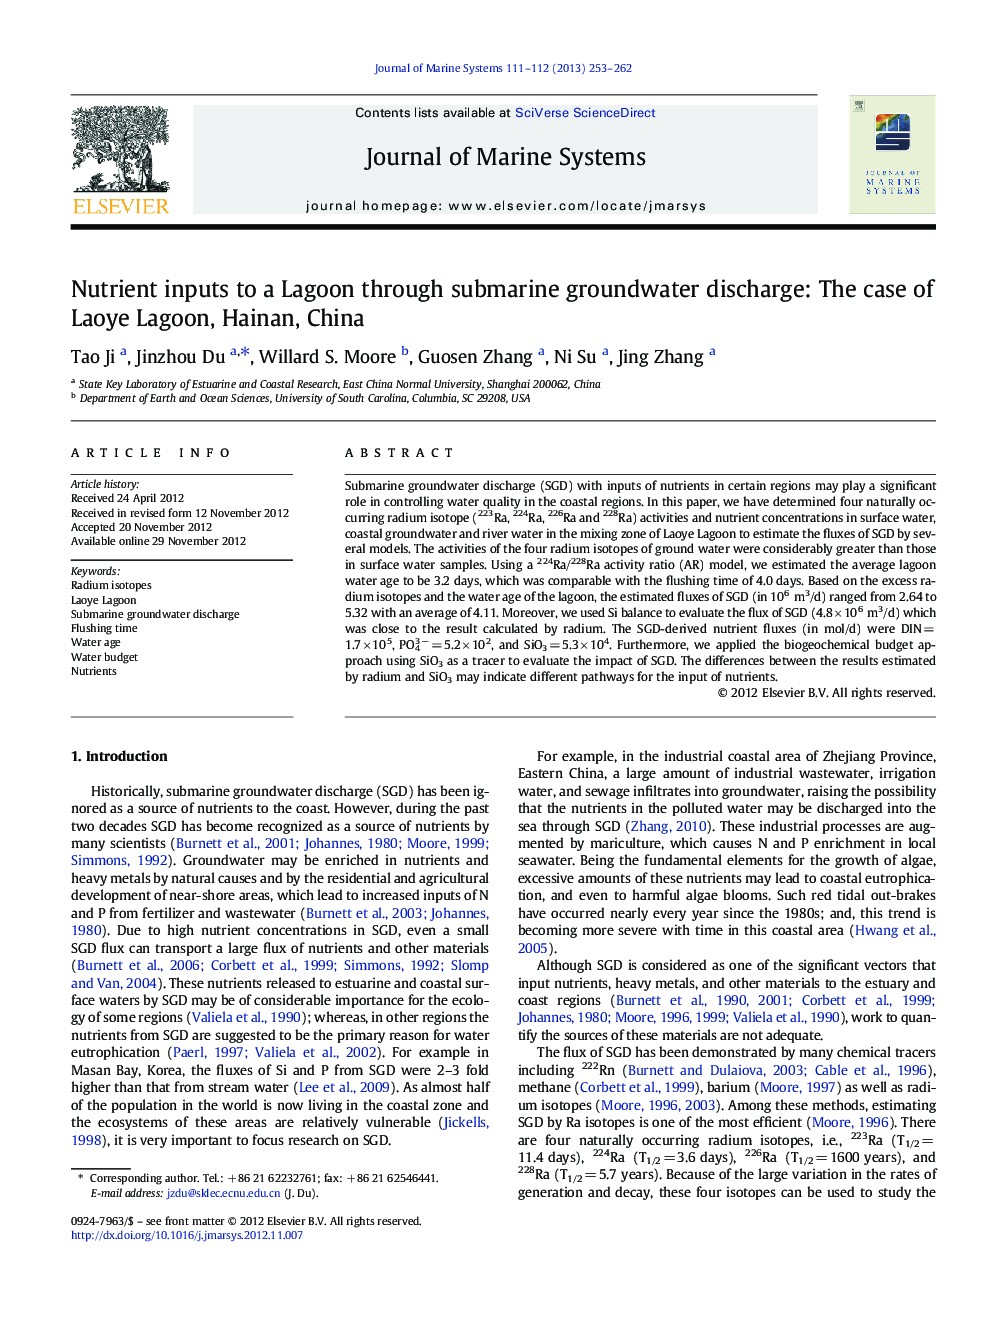 Nutrient inputs to a Lagoon through submarine groundwater discharge: The case of Laoye Lagoon, Hainan, China